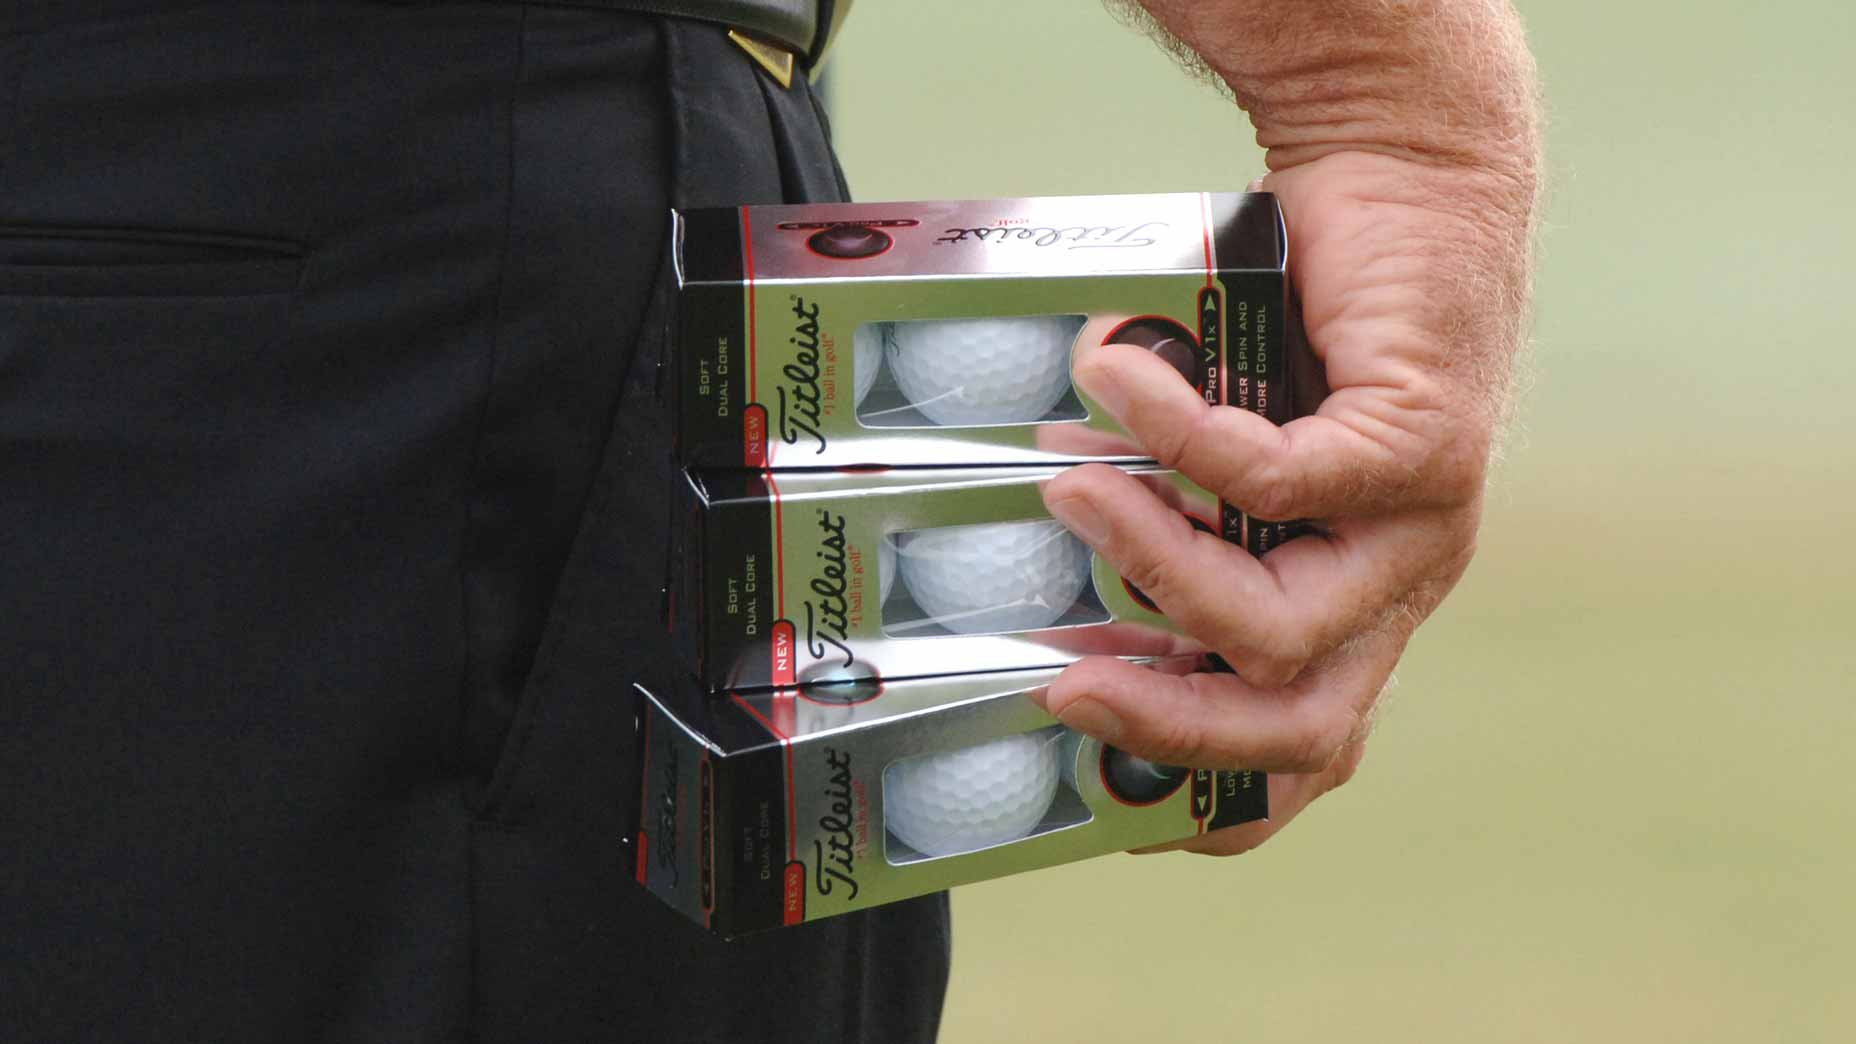 Golfer holding a sleeve of golf balls in hand